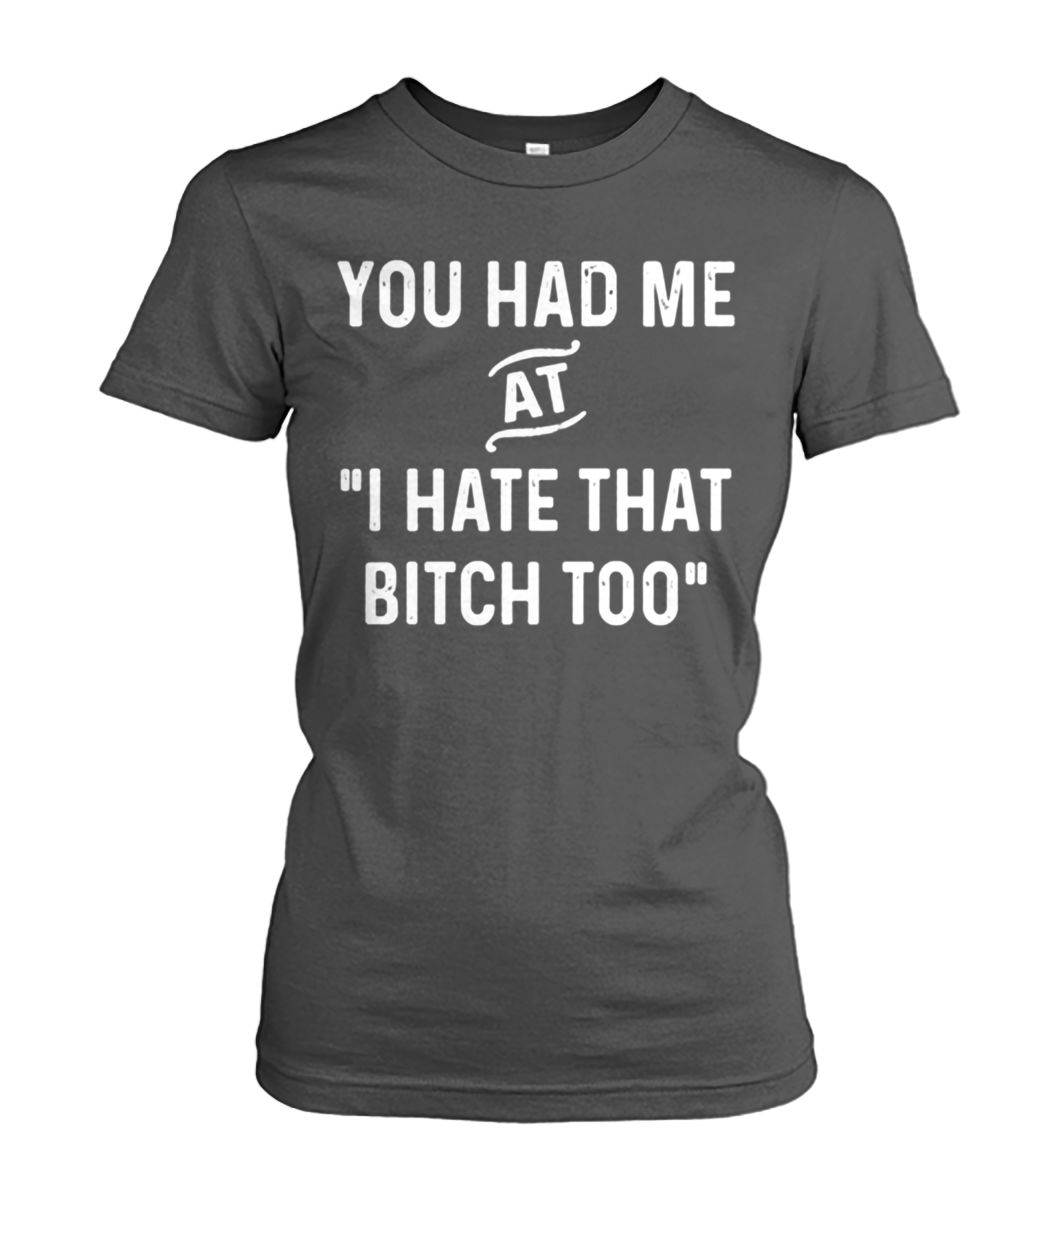 You had me at I hate that women's crew tee